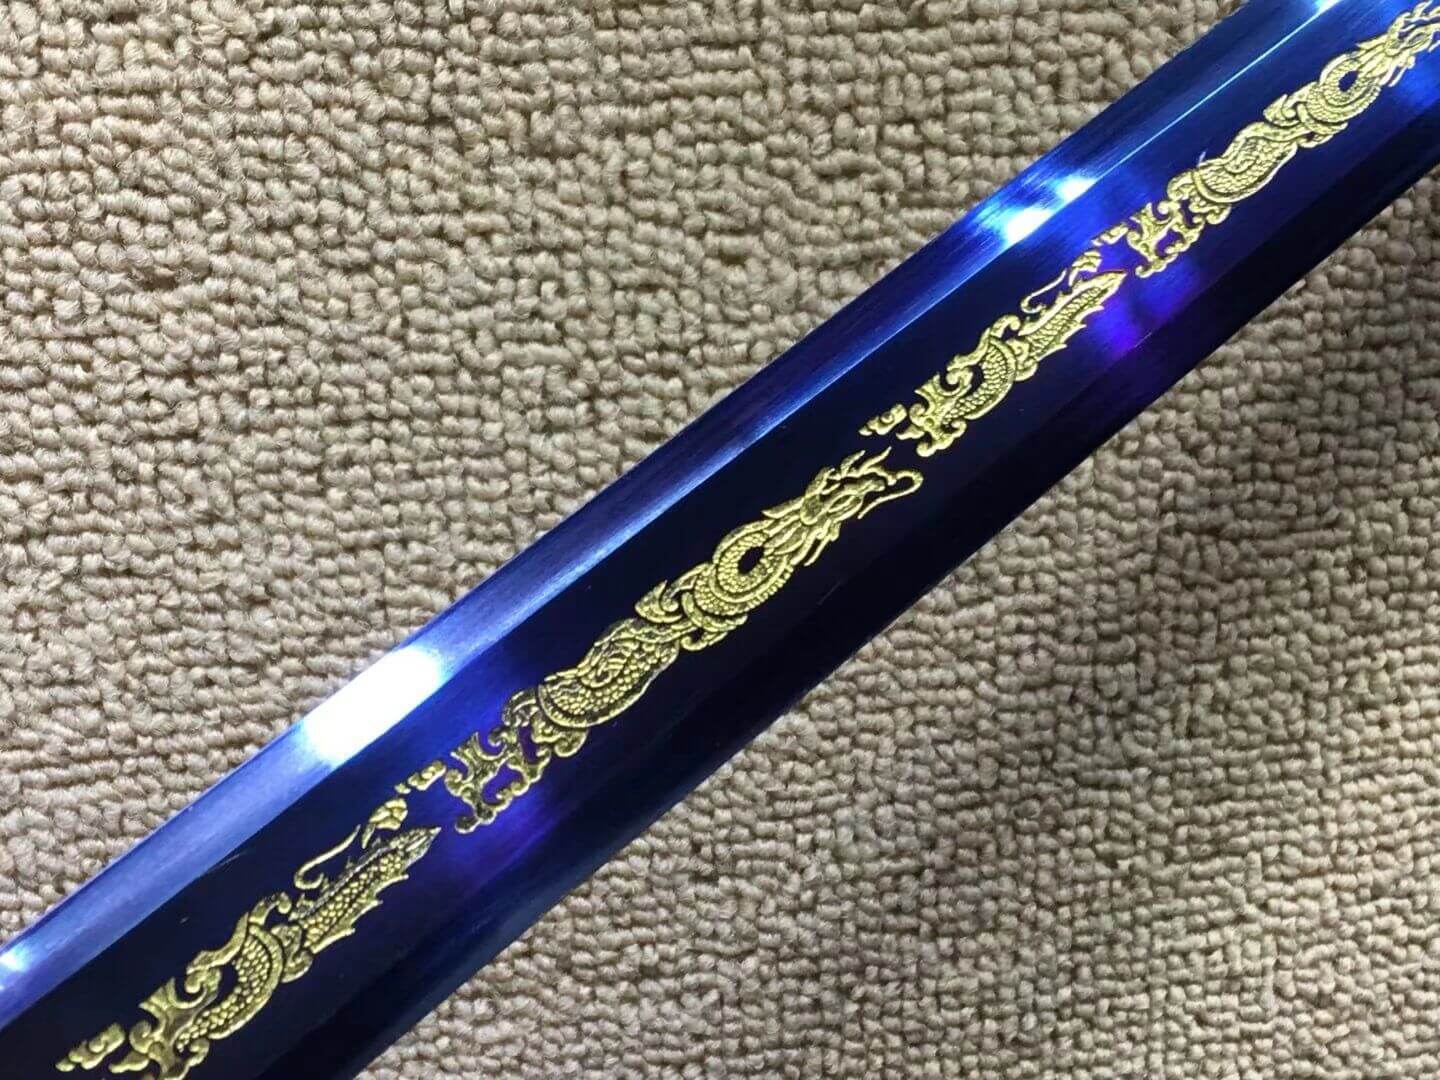 Qin sword,High carbon steel blue blade,Redwood scabbard,Alloy fittings - Chinese sword shop